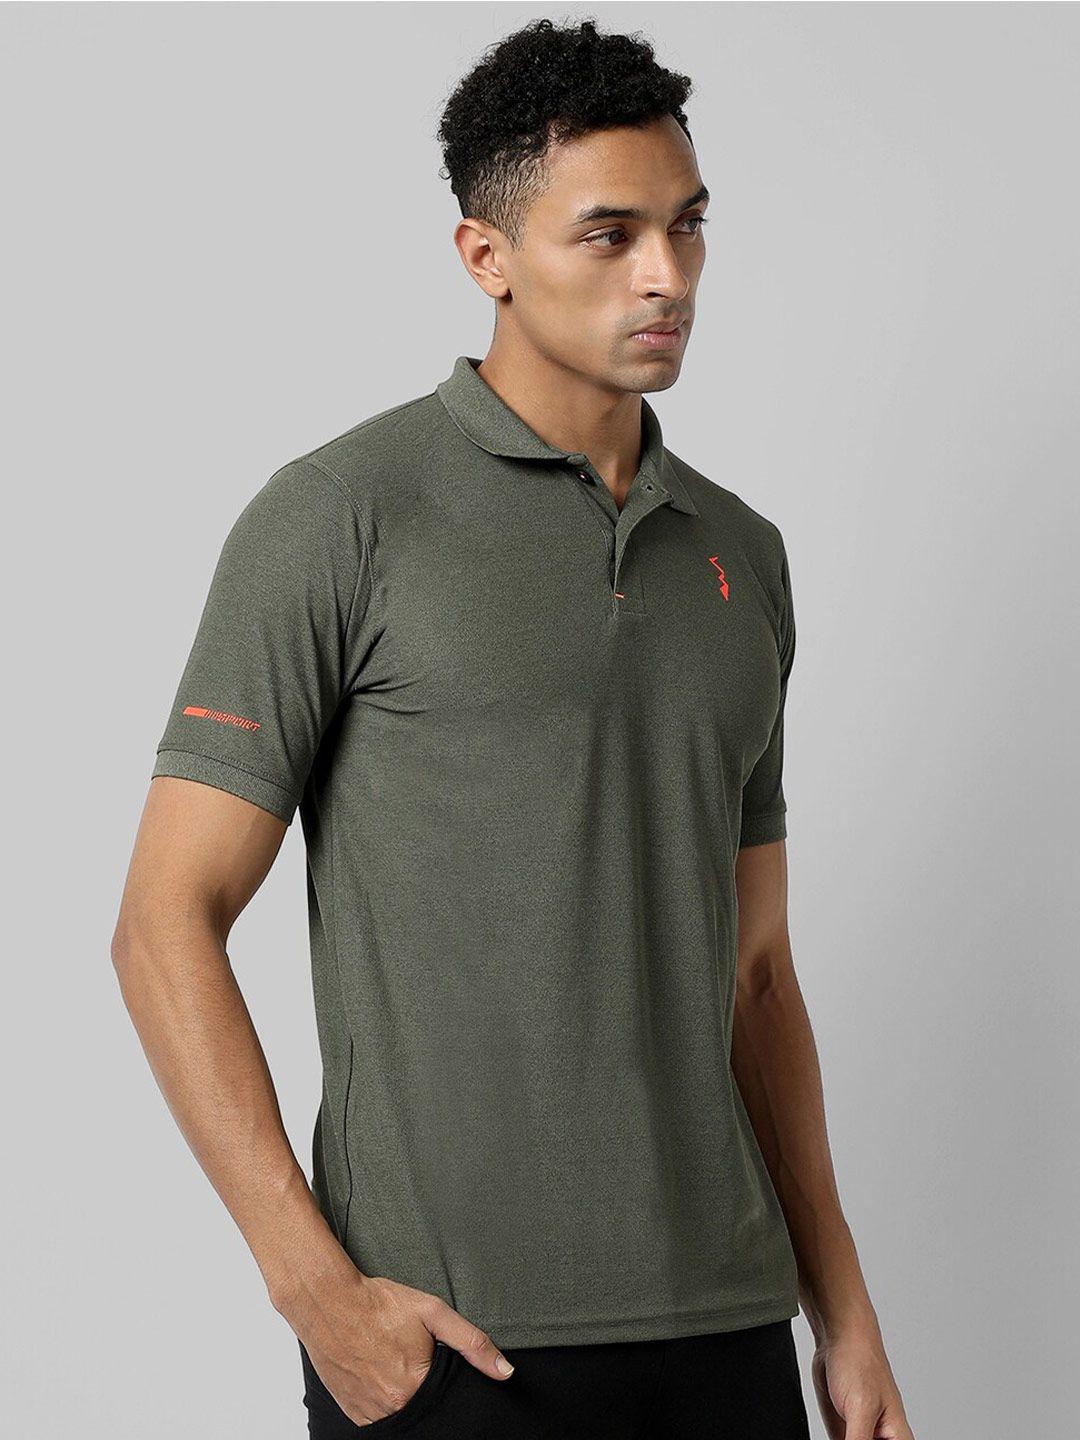 campus sutra polo collar training or gym t-shirt